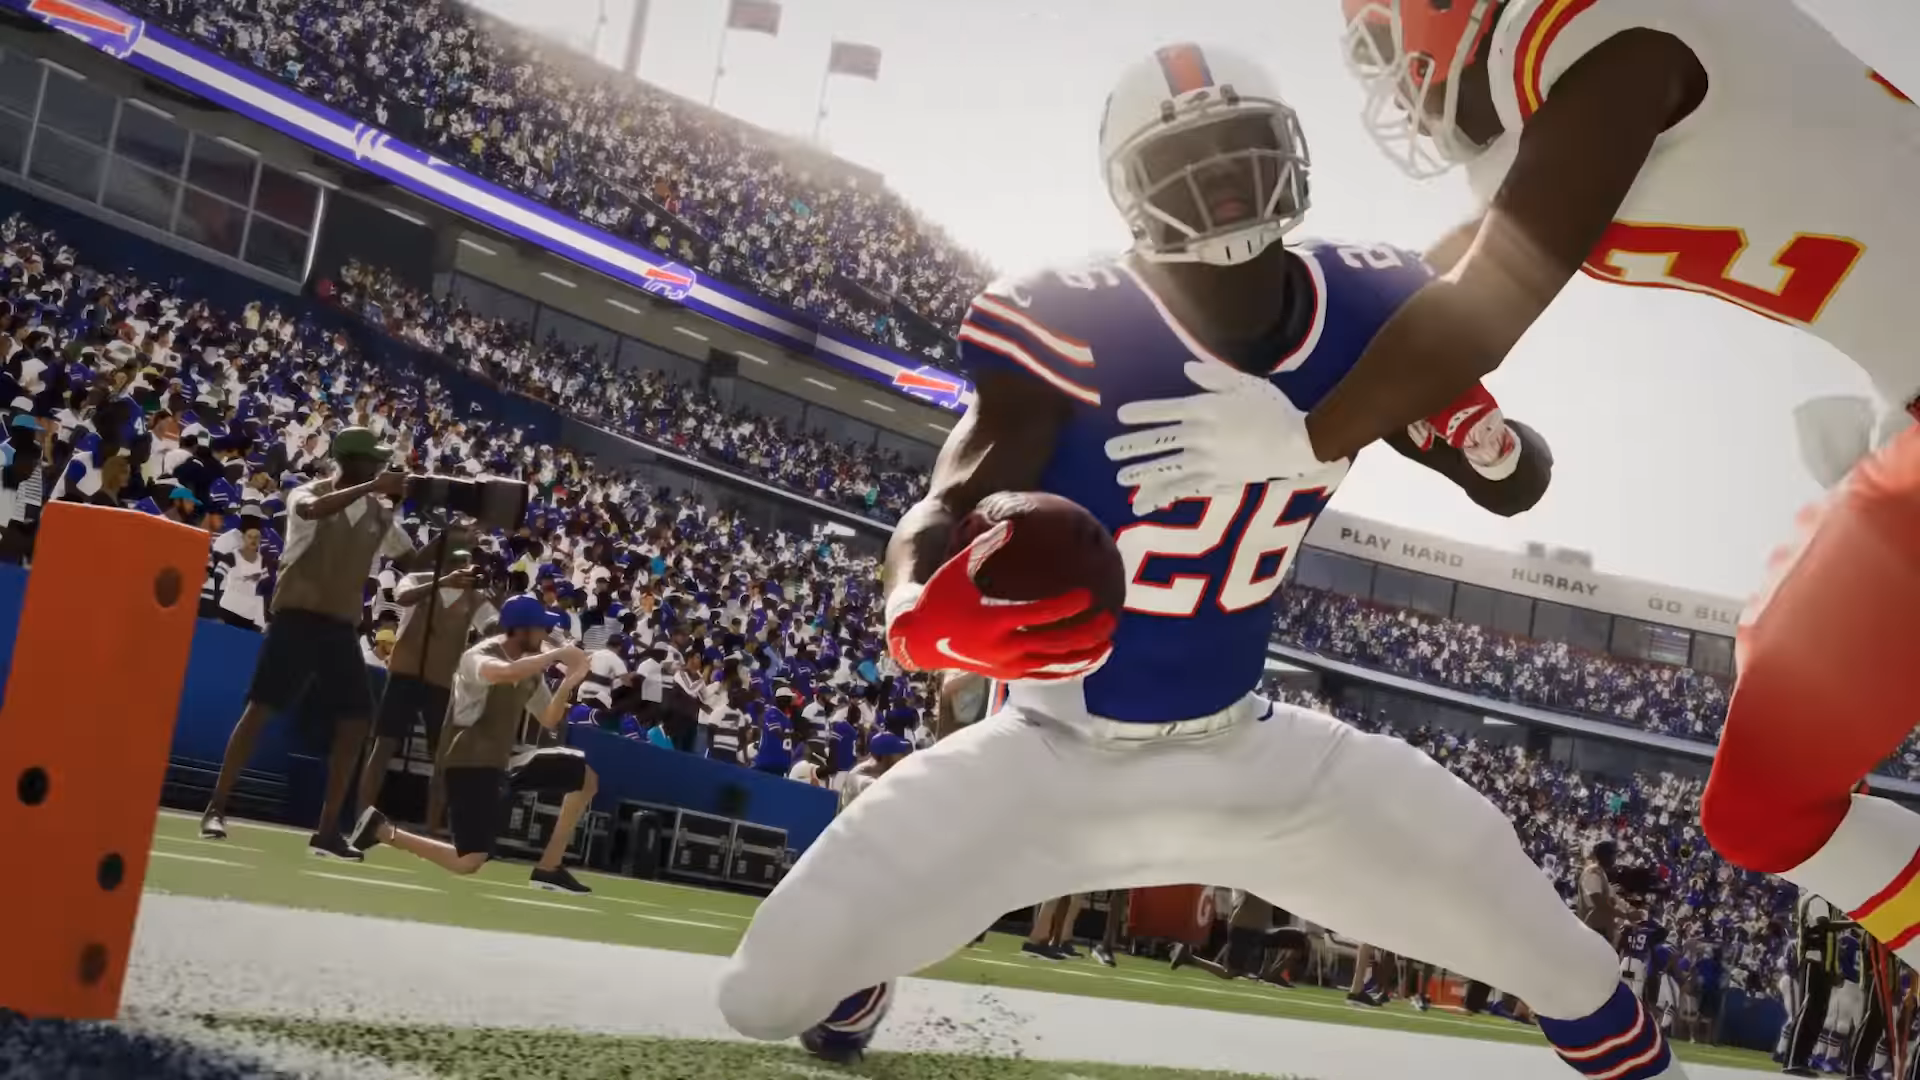  We played Madden 21, and here’s what we thought – Hands-on beta impressions 